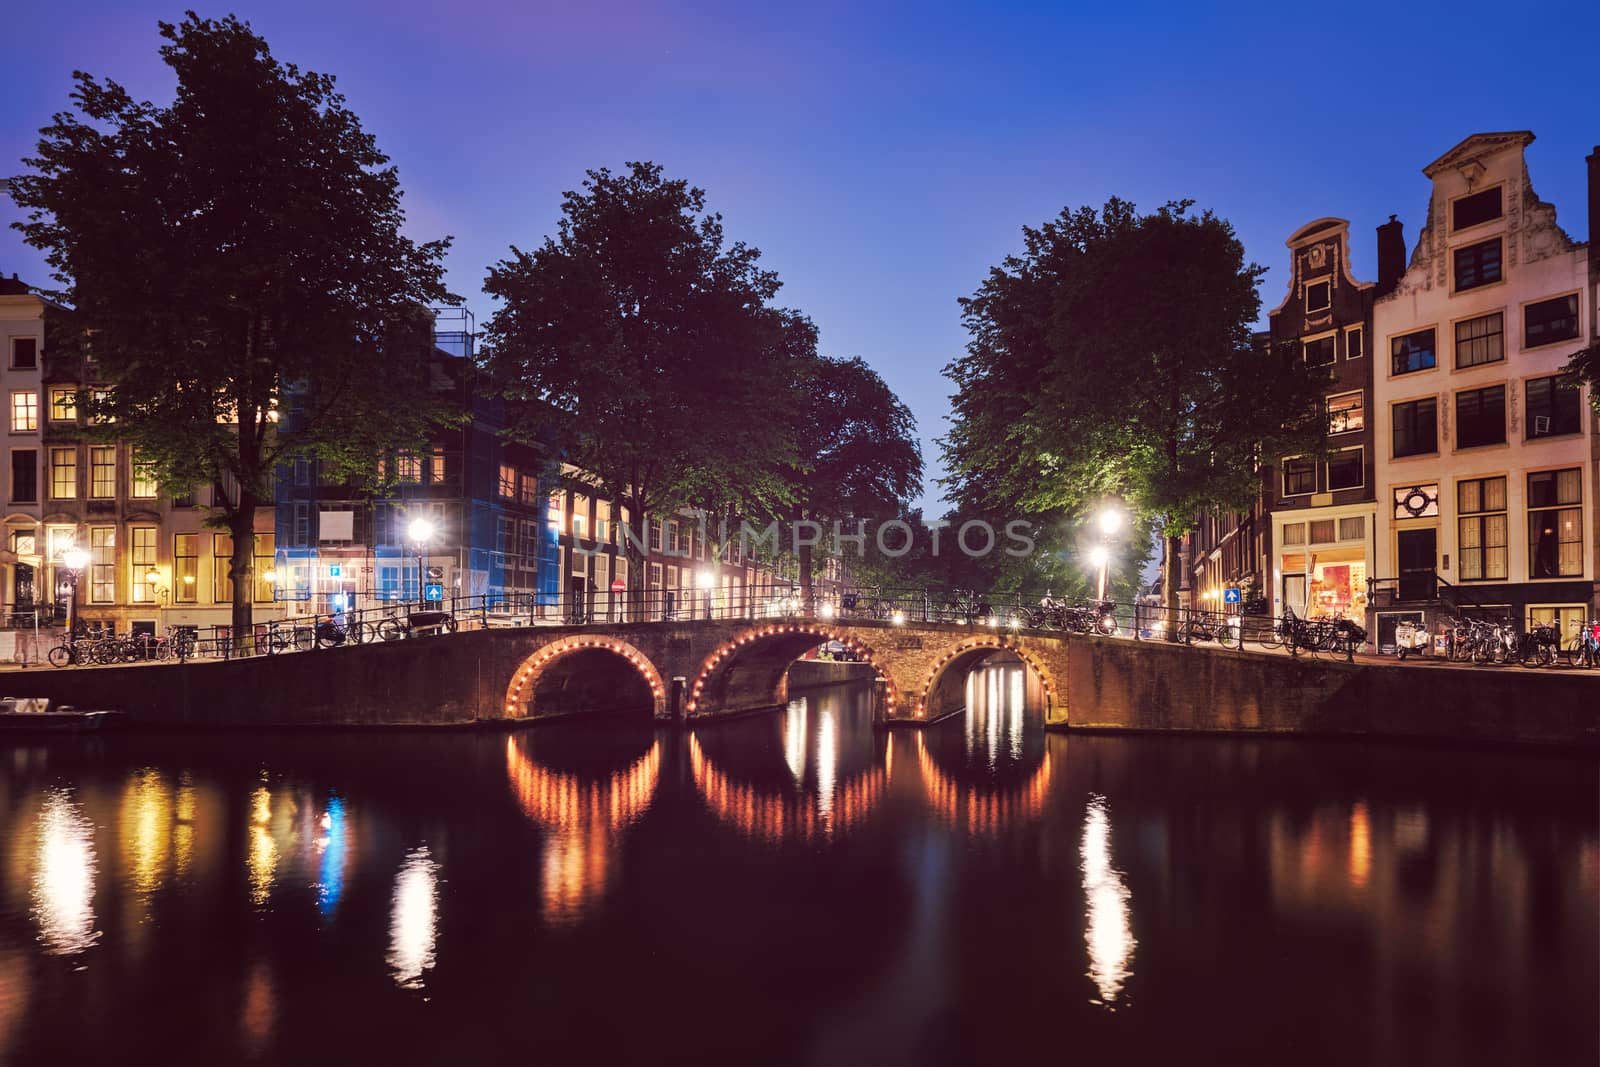 Amterdam canal, bridge and medieval houses in the evening by dimol